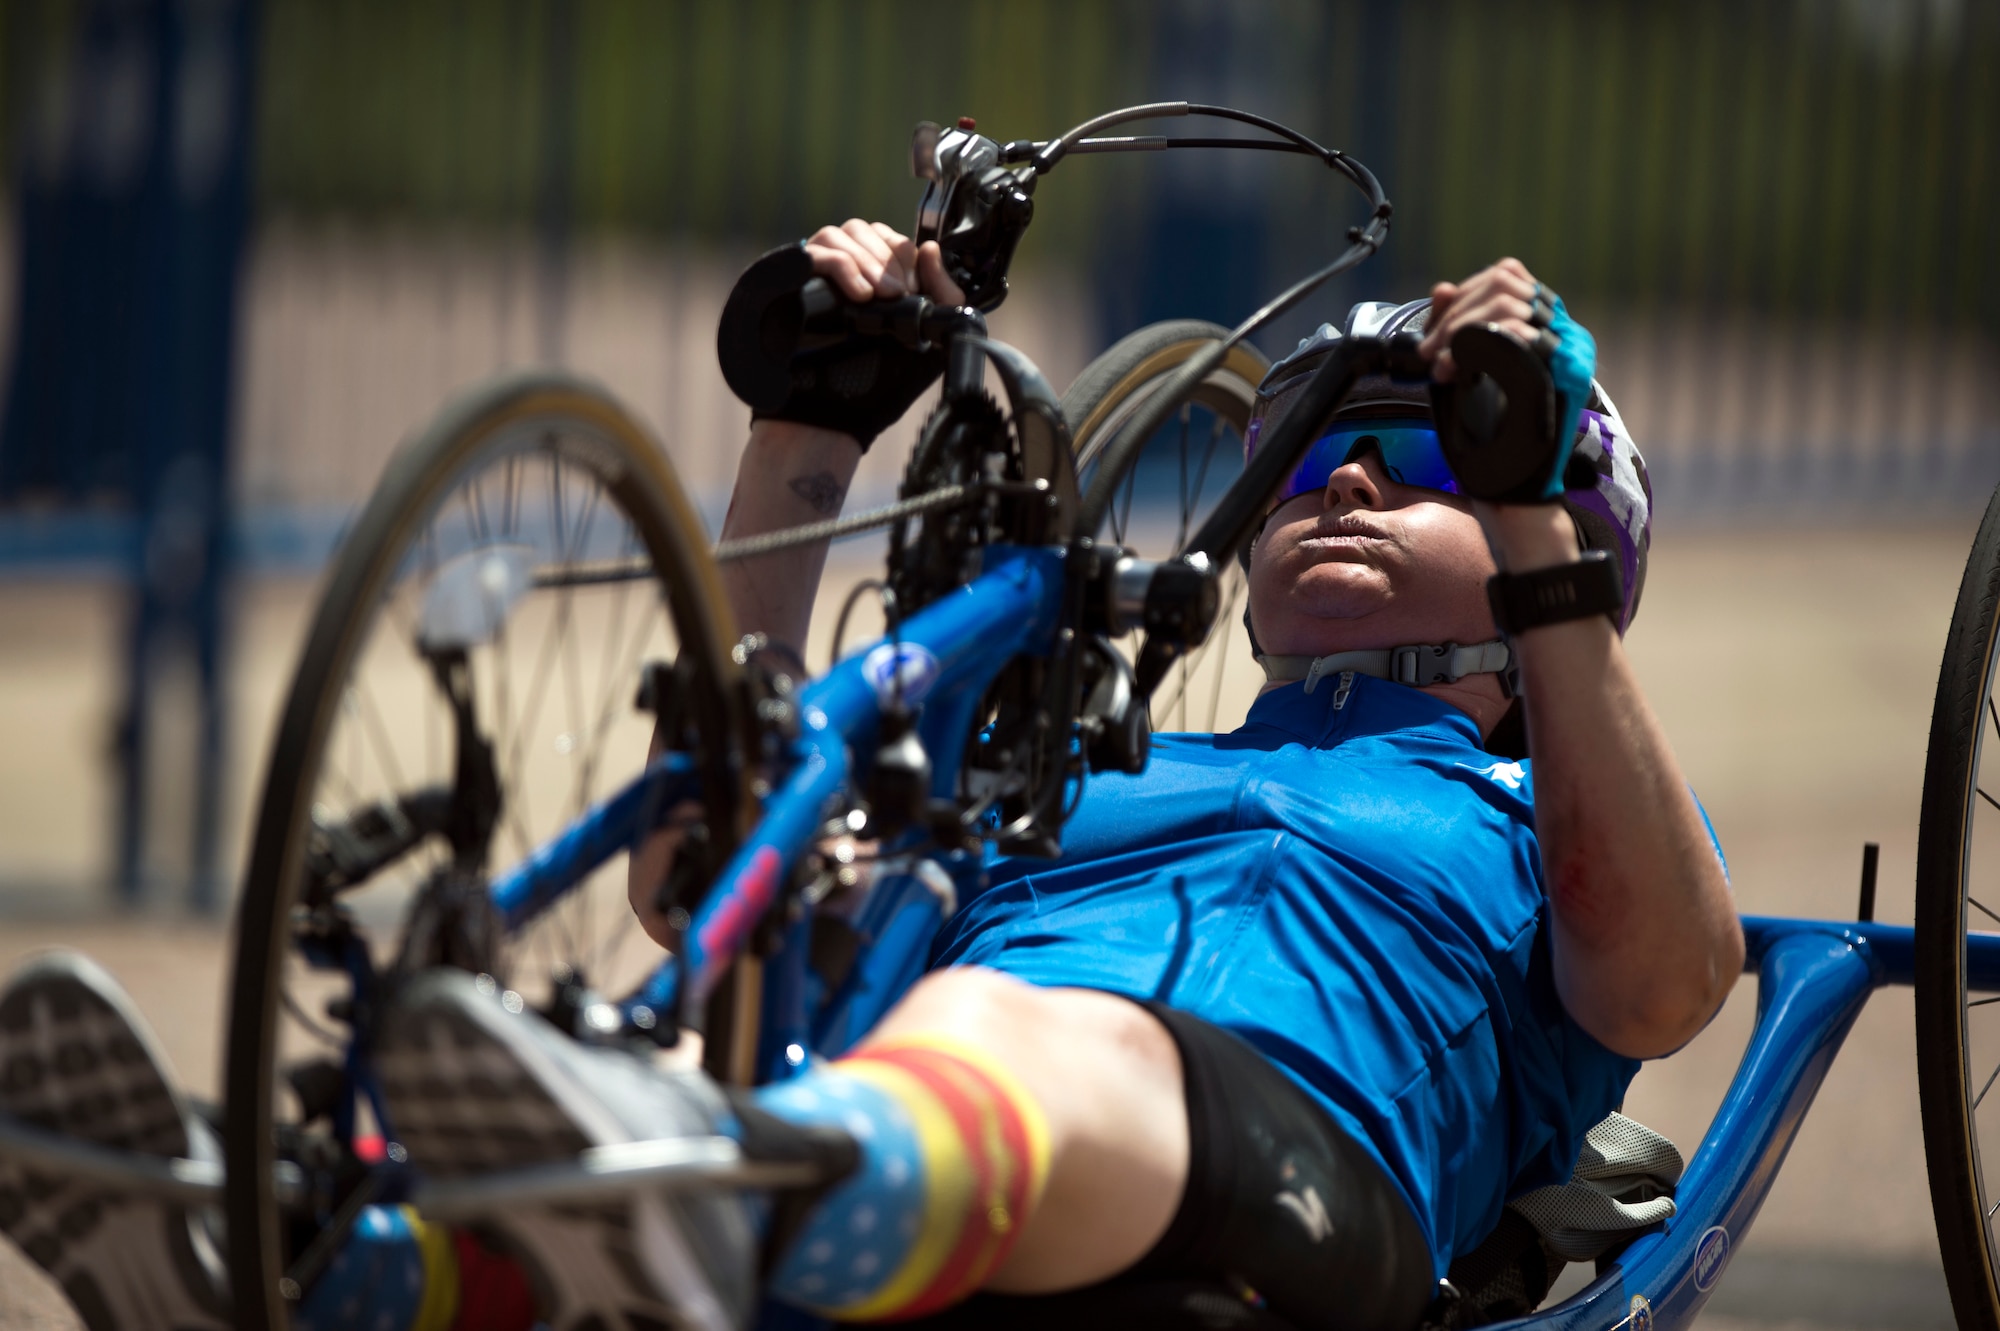 Master Sgt. Lisa Goad, Team Air Force athlete, powers a hand cycle during the 2018 Department of Defense Warrior Games time trials competition at the U.S. Air Force Academy in Colorado Springs, Colo. on June 6. (DoD photo by EJ Hersom)